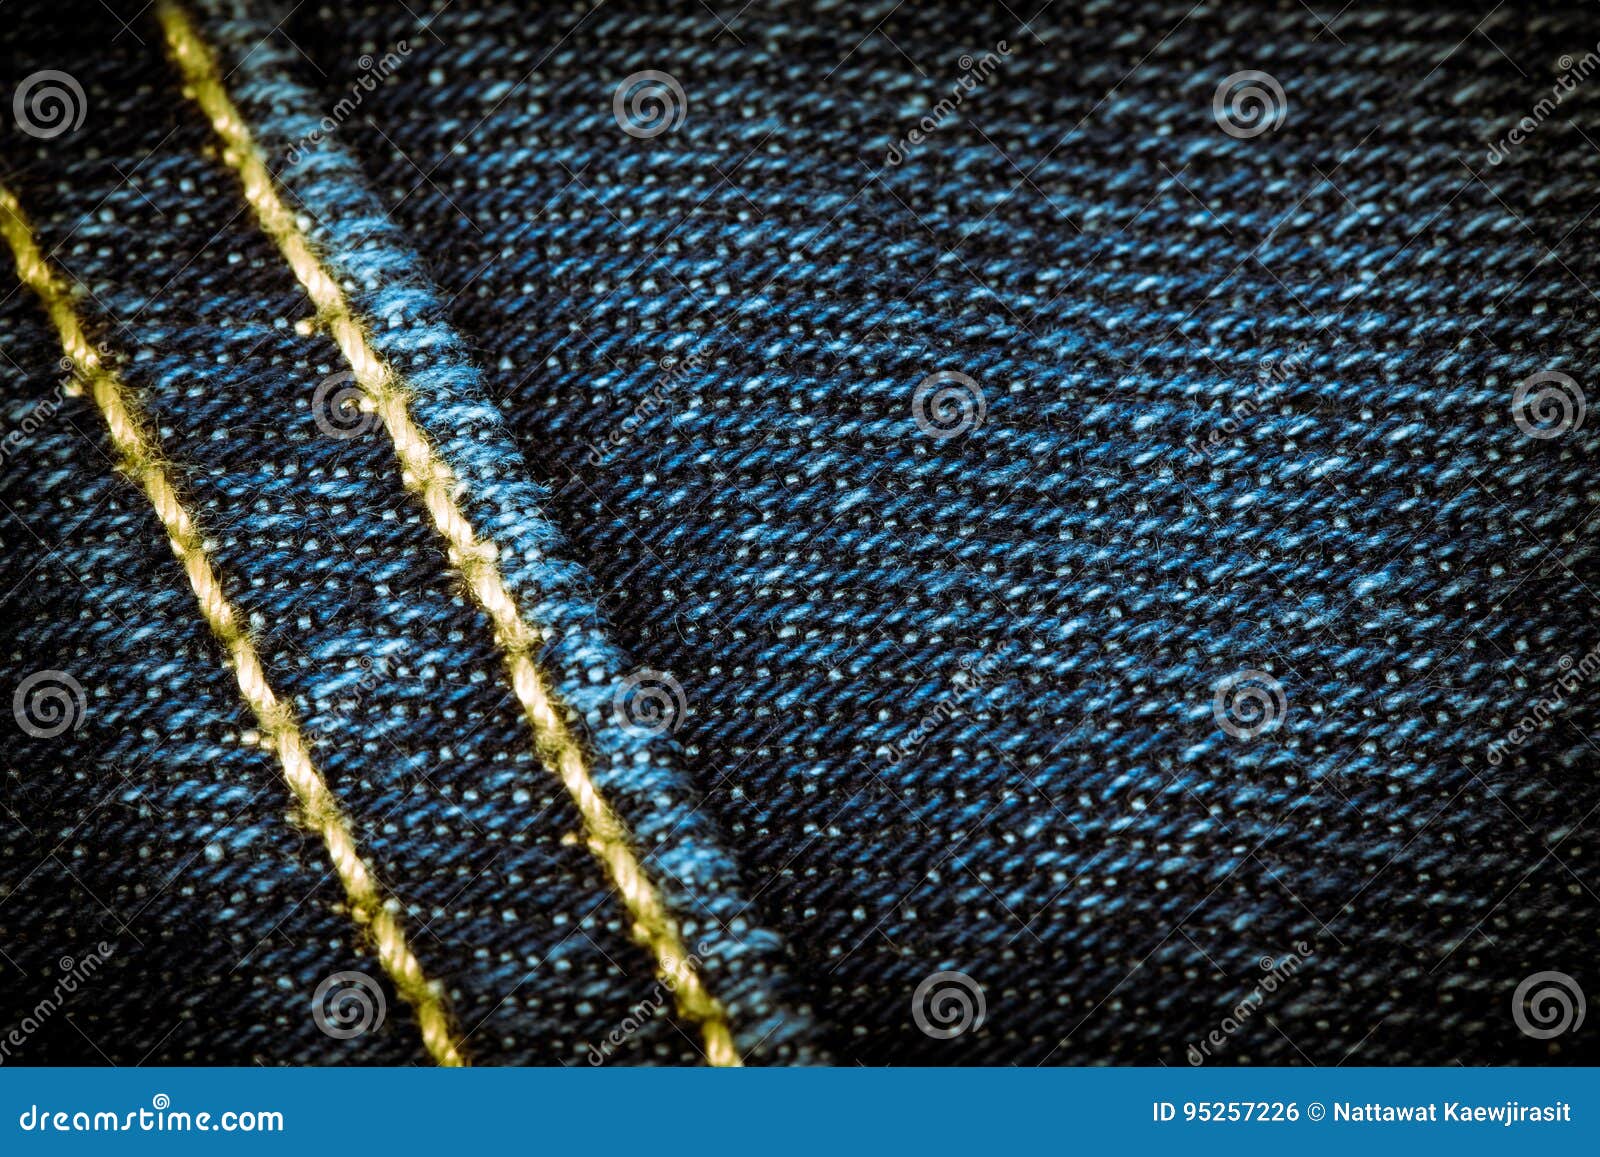 Blue jeans background stock photo. Image of closeup, casual - 95257226